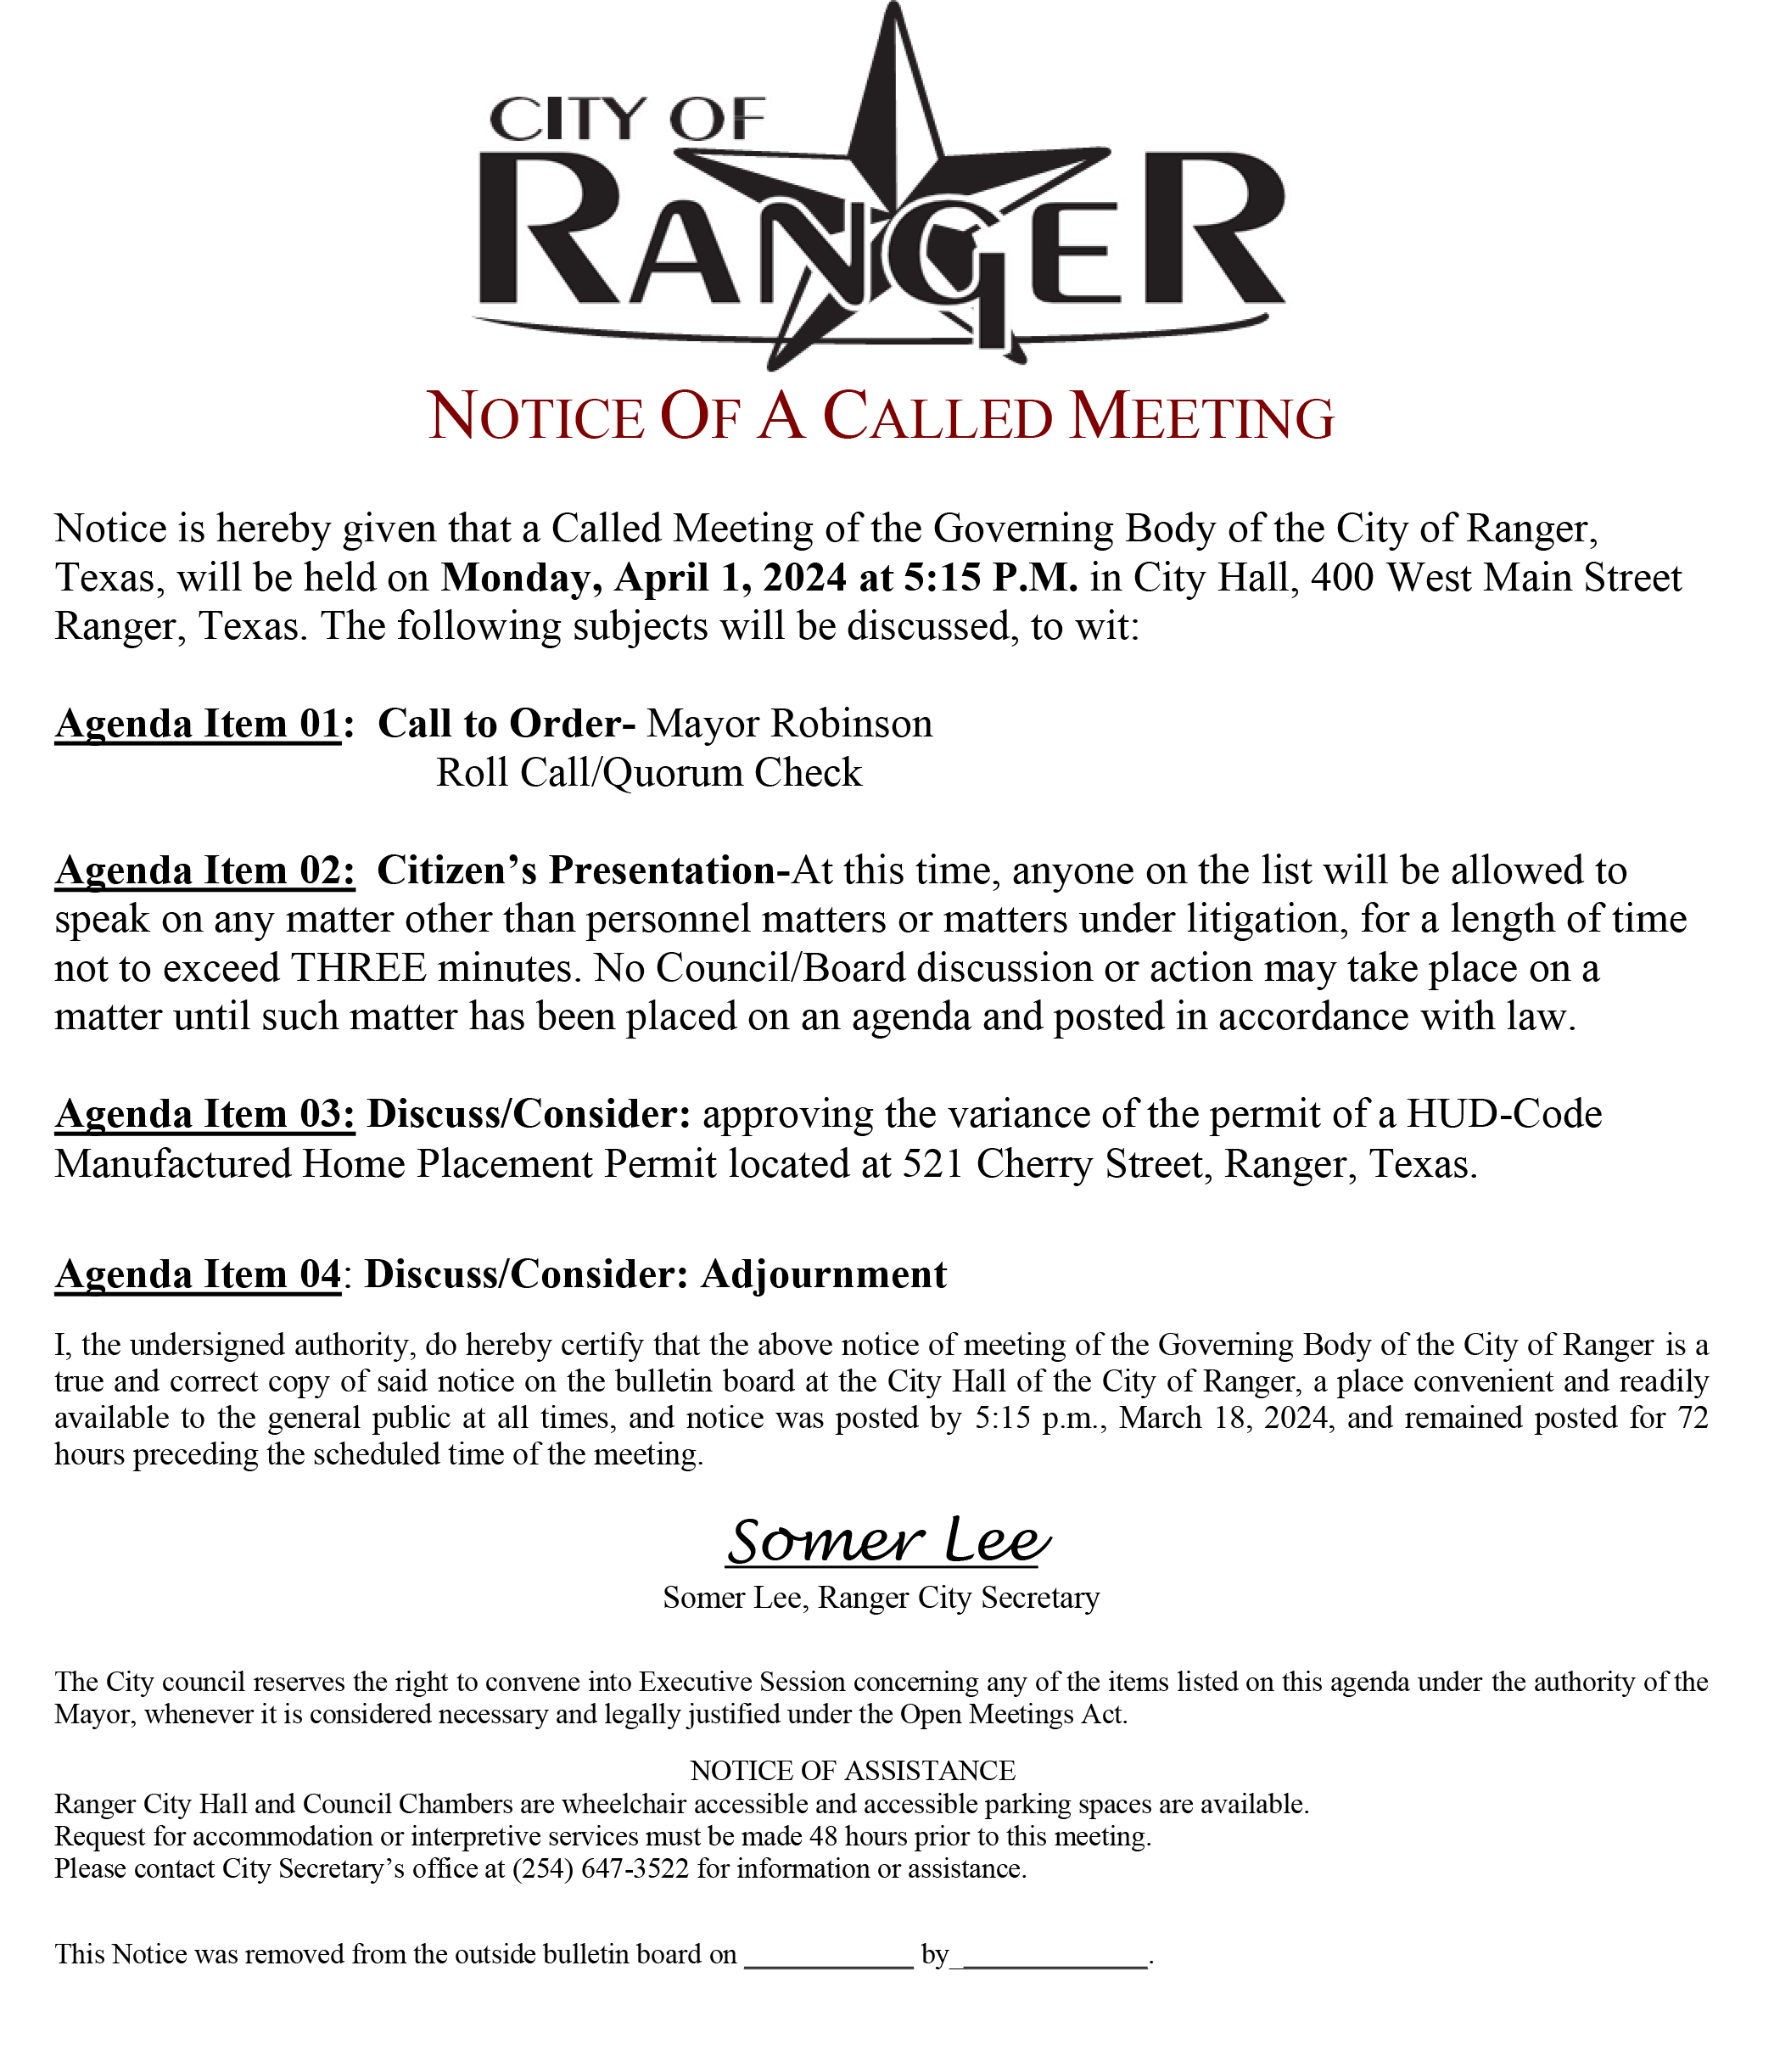 Agenda for a Called Meeting of the Governing Body of the City of Ranger to be held on Monday, April 1, 2024...